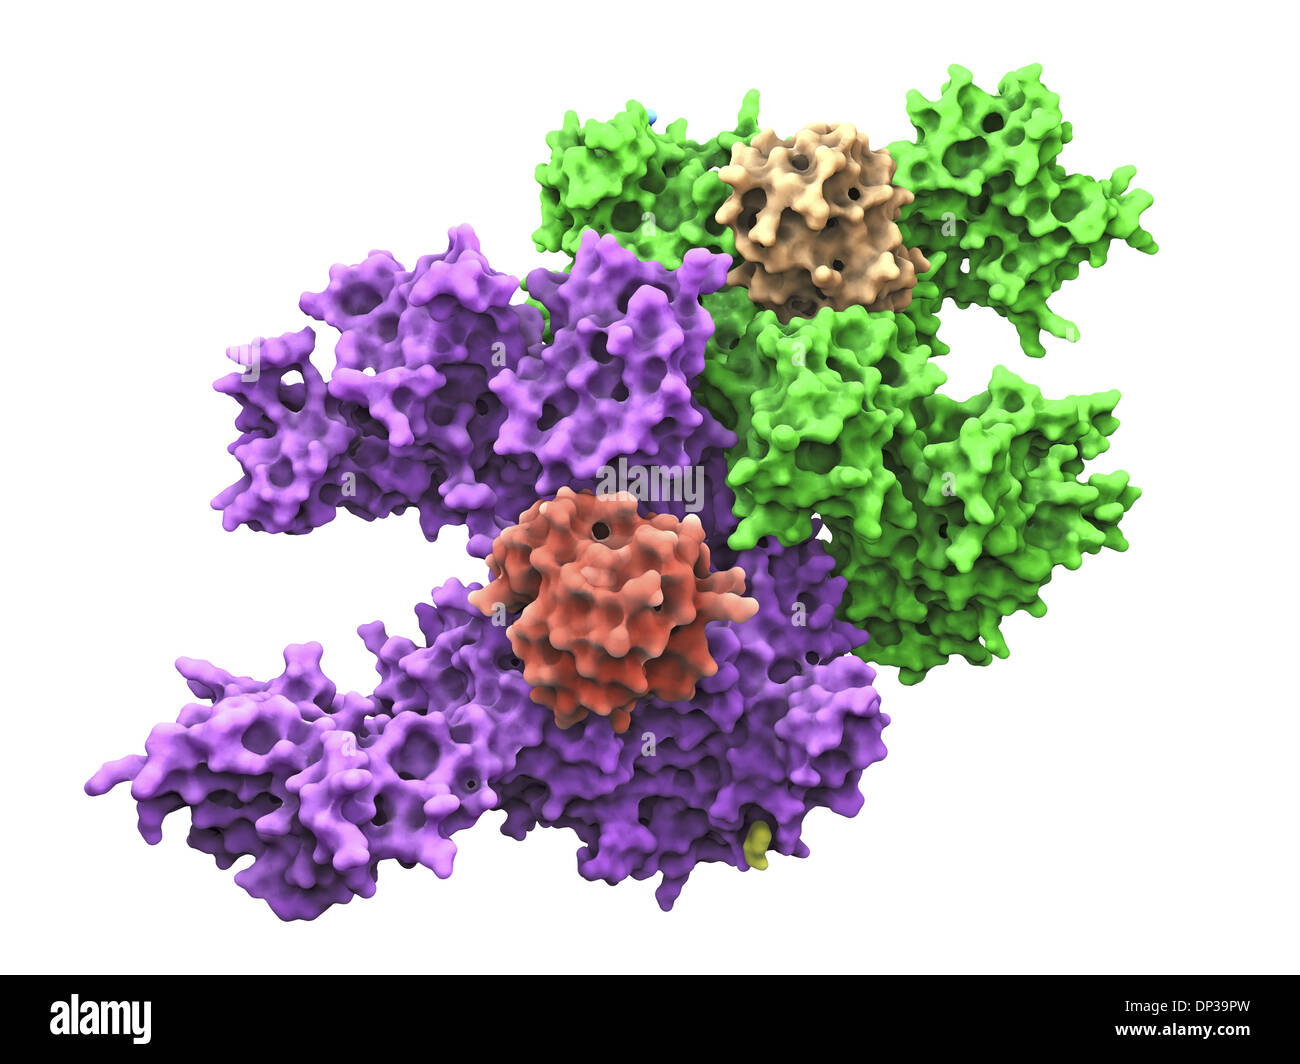 Ubiquitin activating enzyme protein E1 Stock Photo